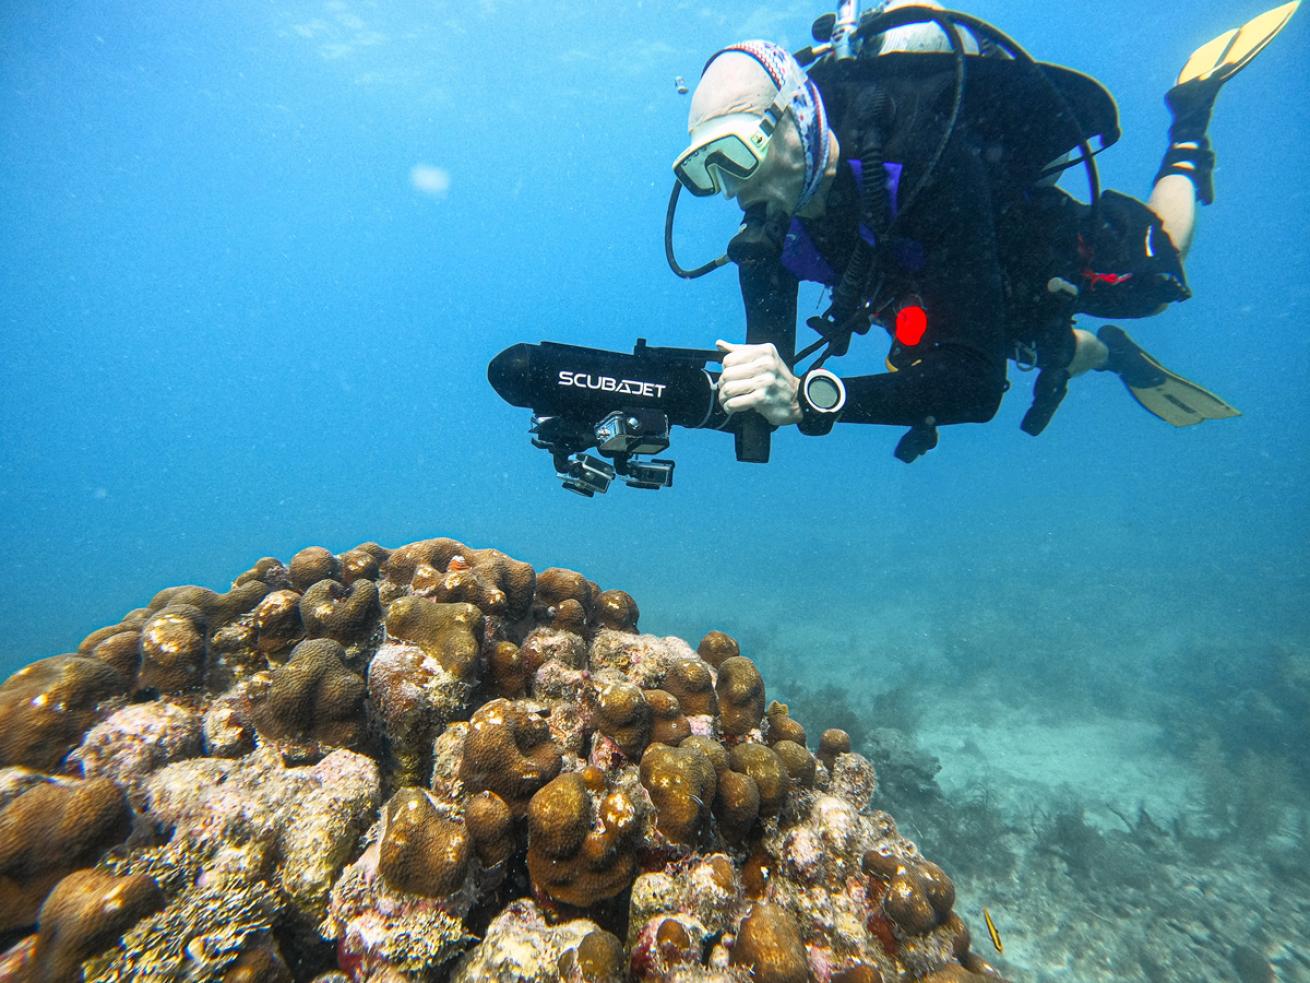 To make a 3D model, Peter McDougall captures footage of a reef.